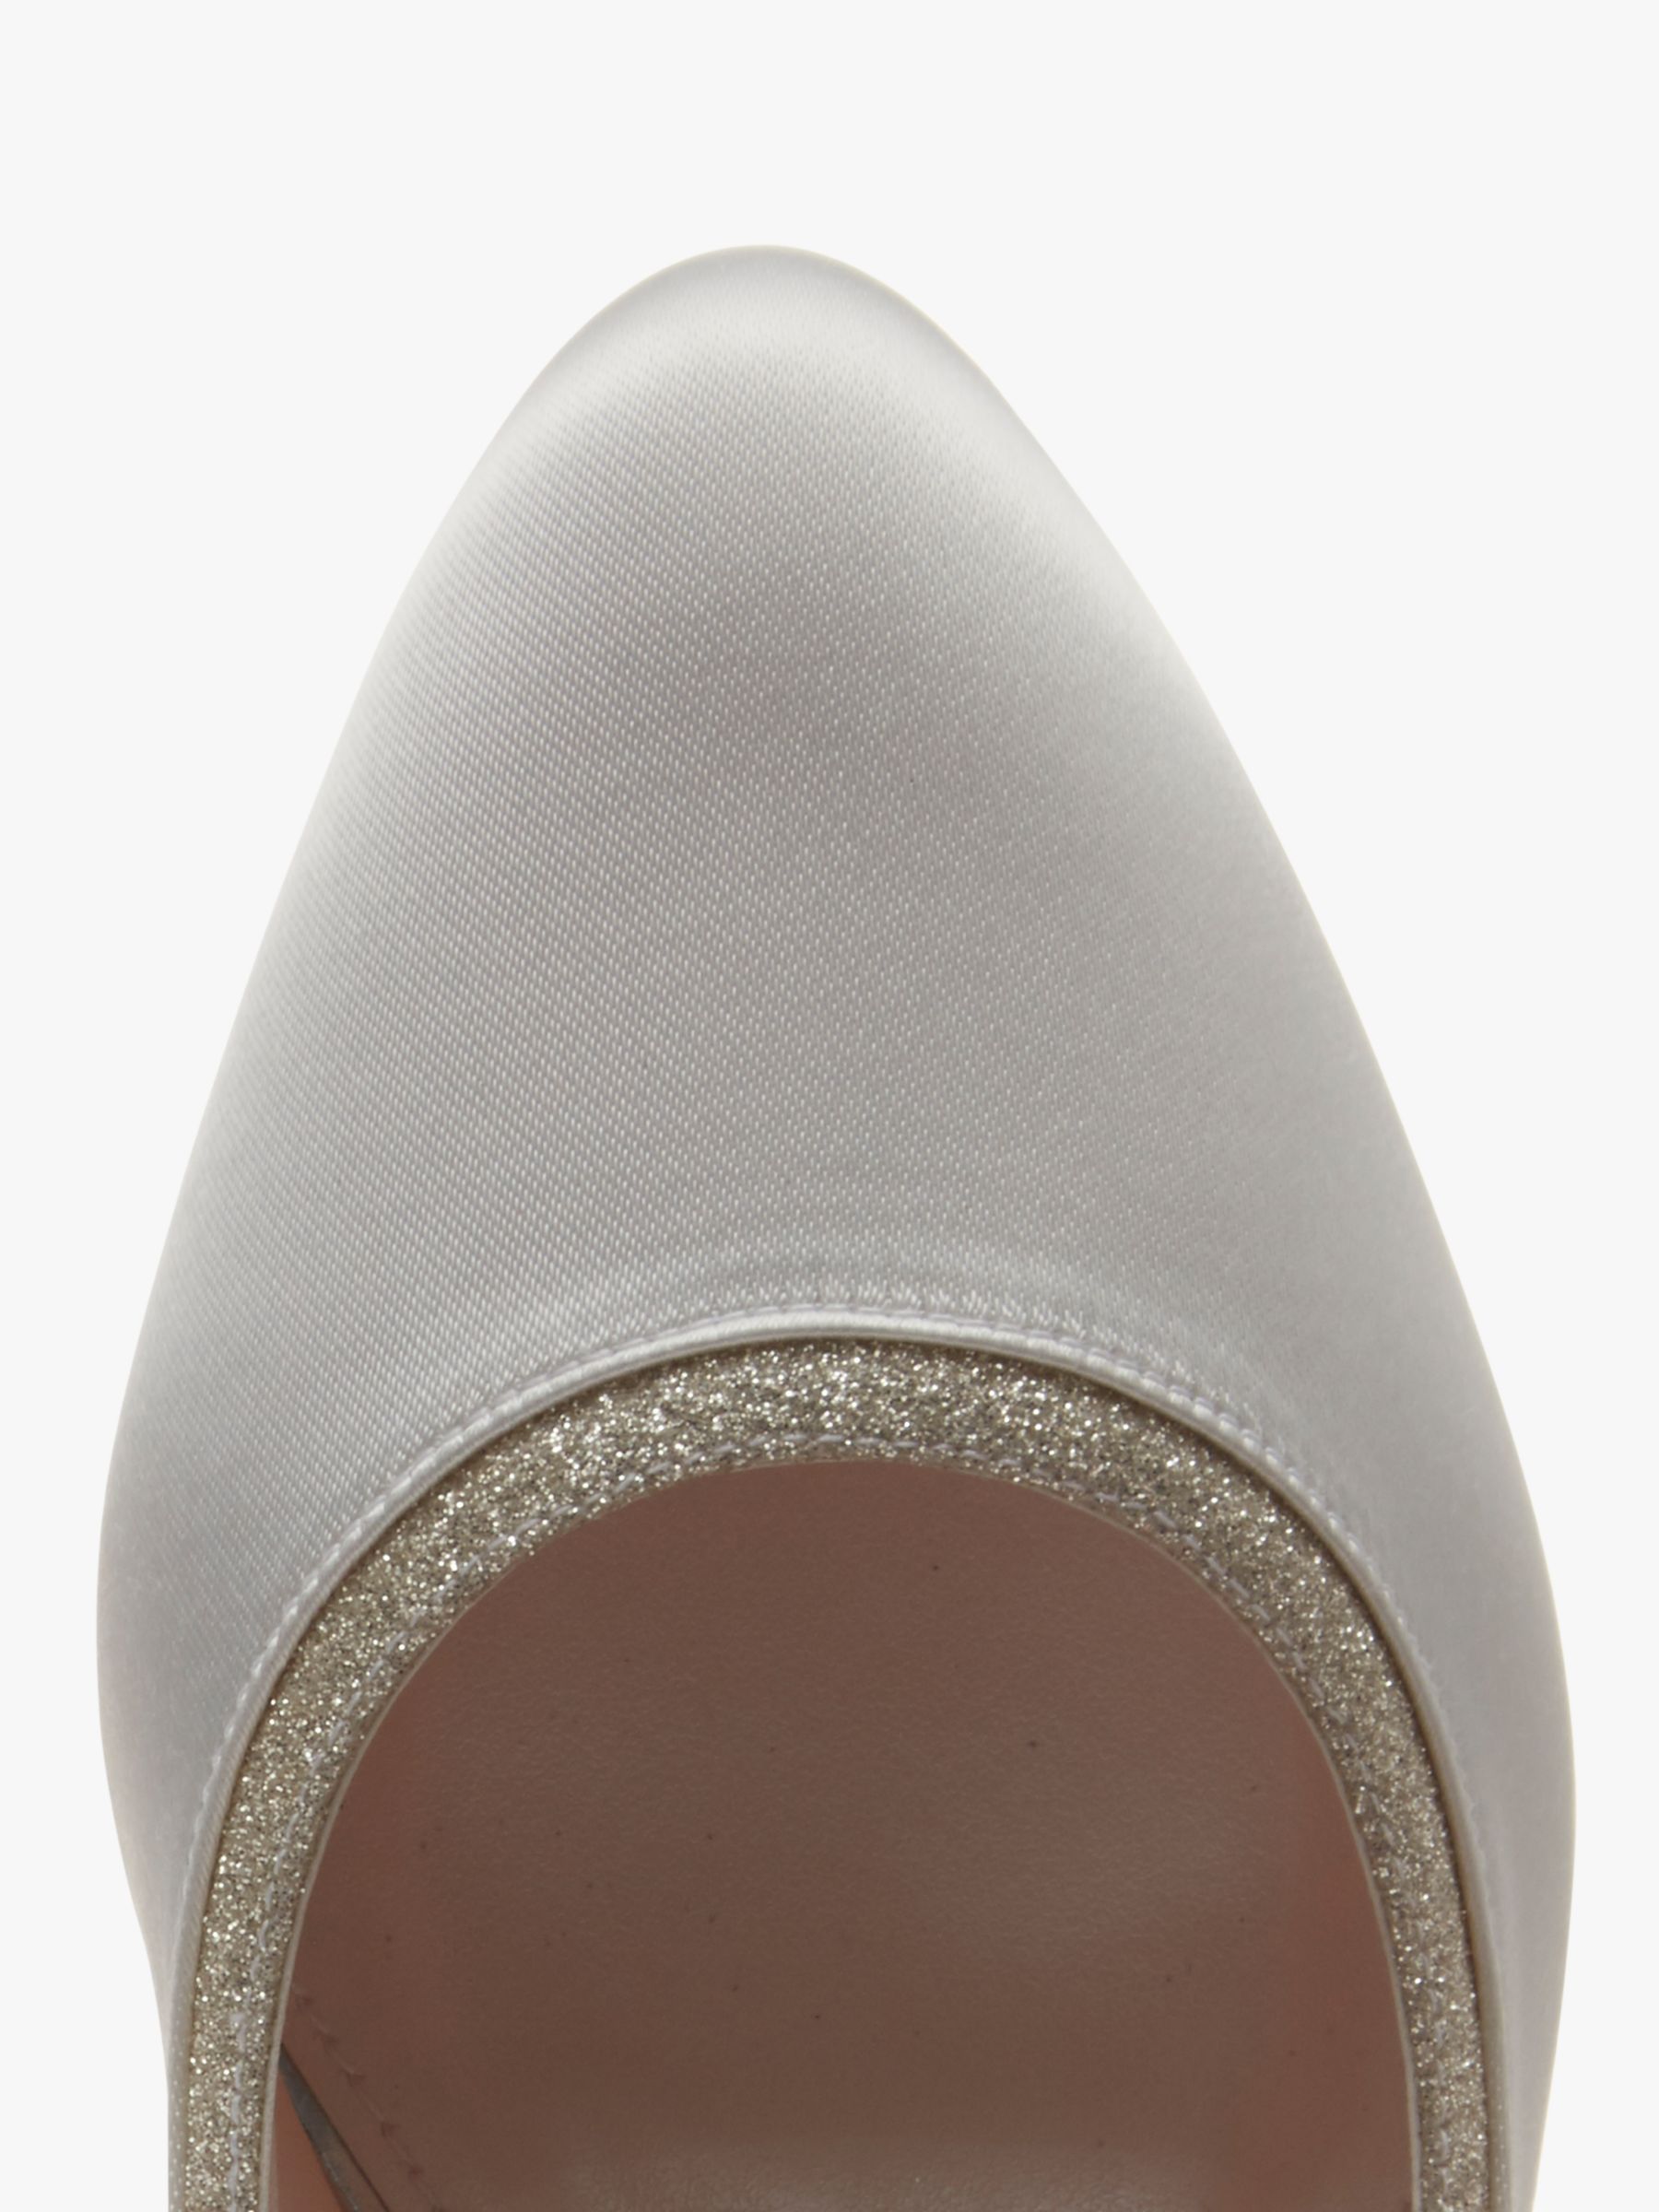 Buy Rainbow Club Bobbie Cone Heeled Court Shoes, Ivory Online at johnlewis.com